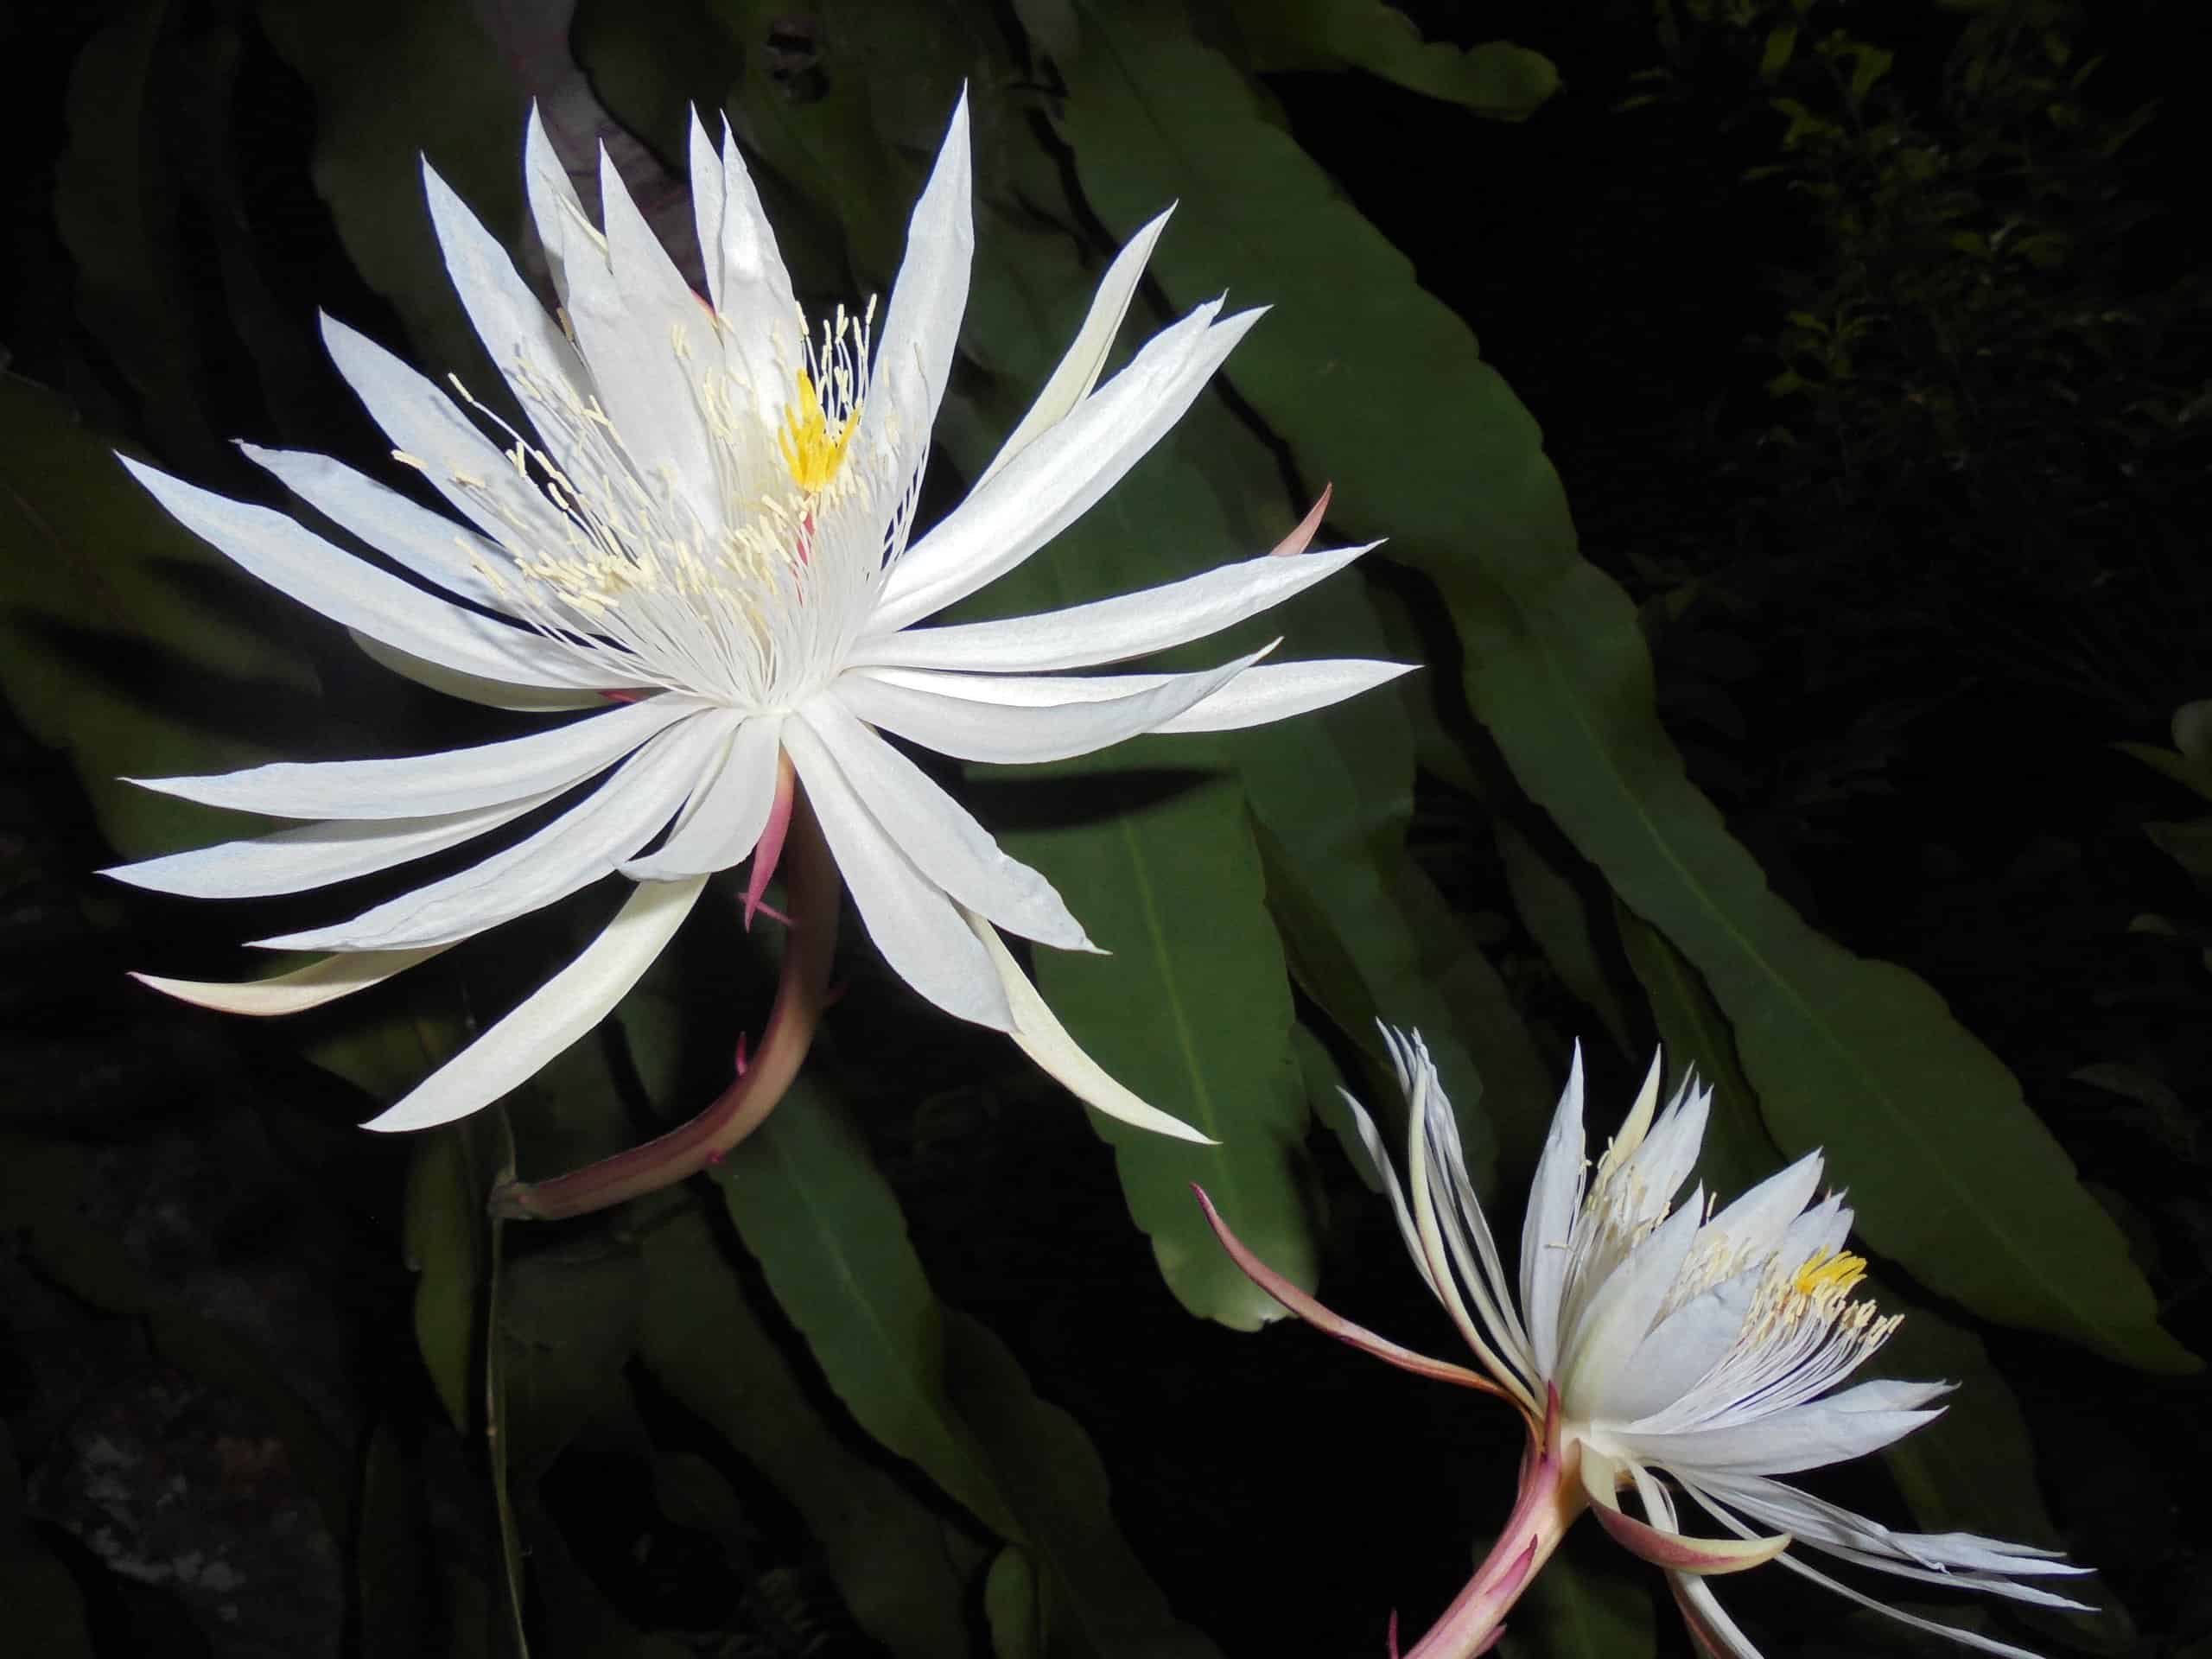 Night Blooming Cactus - Varieties, How to Propagate and More - A-Z Animals